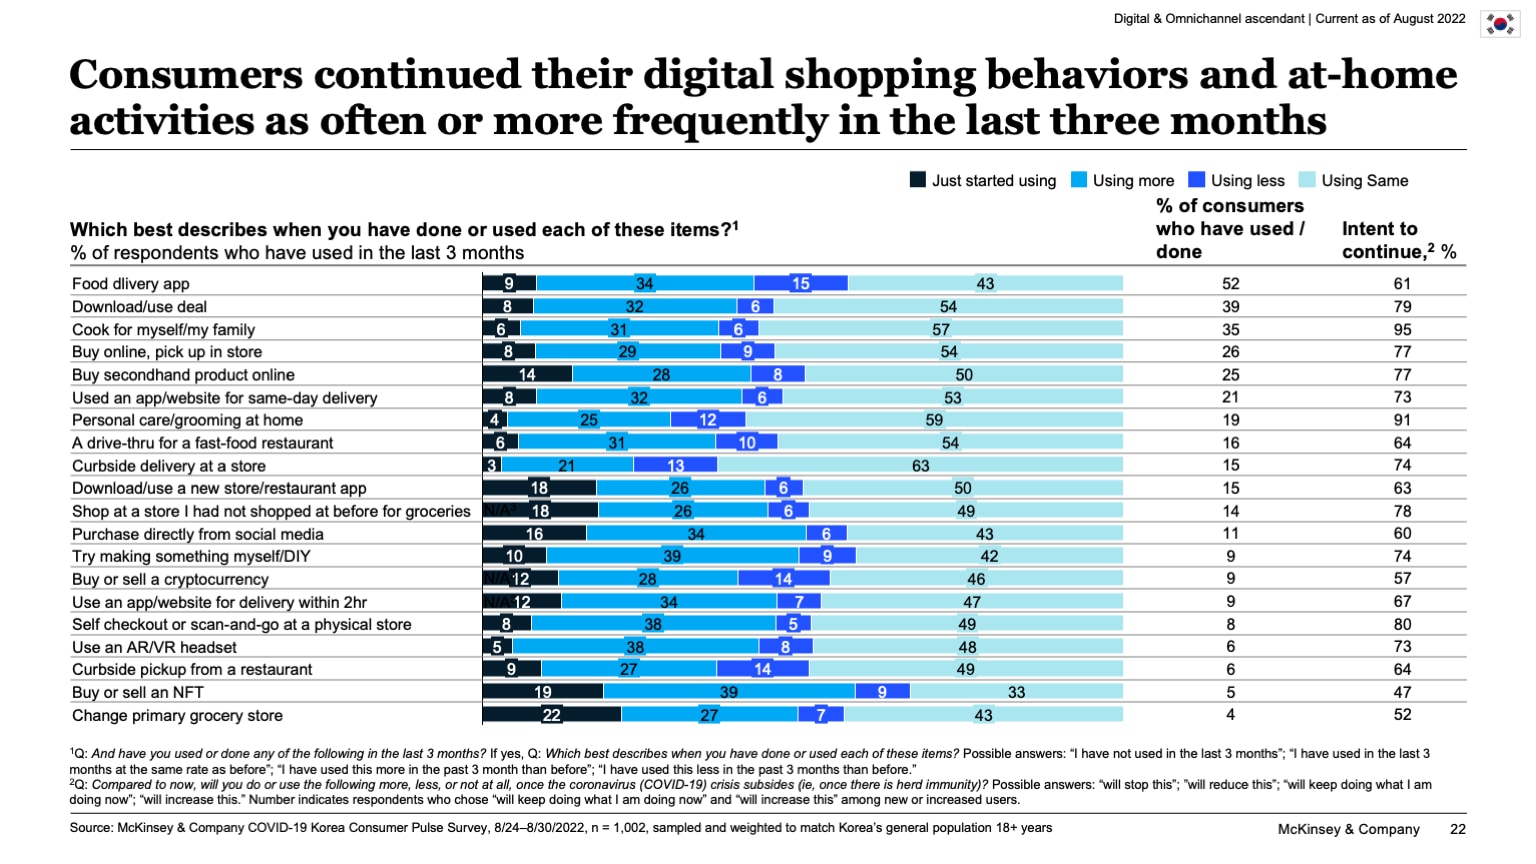 Consumers continued their digital shopping behaviors and at-home activities as often or more frequently in the last three months